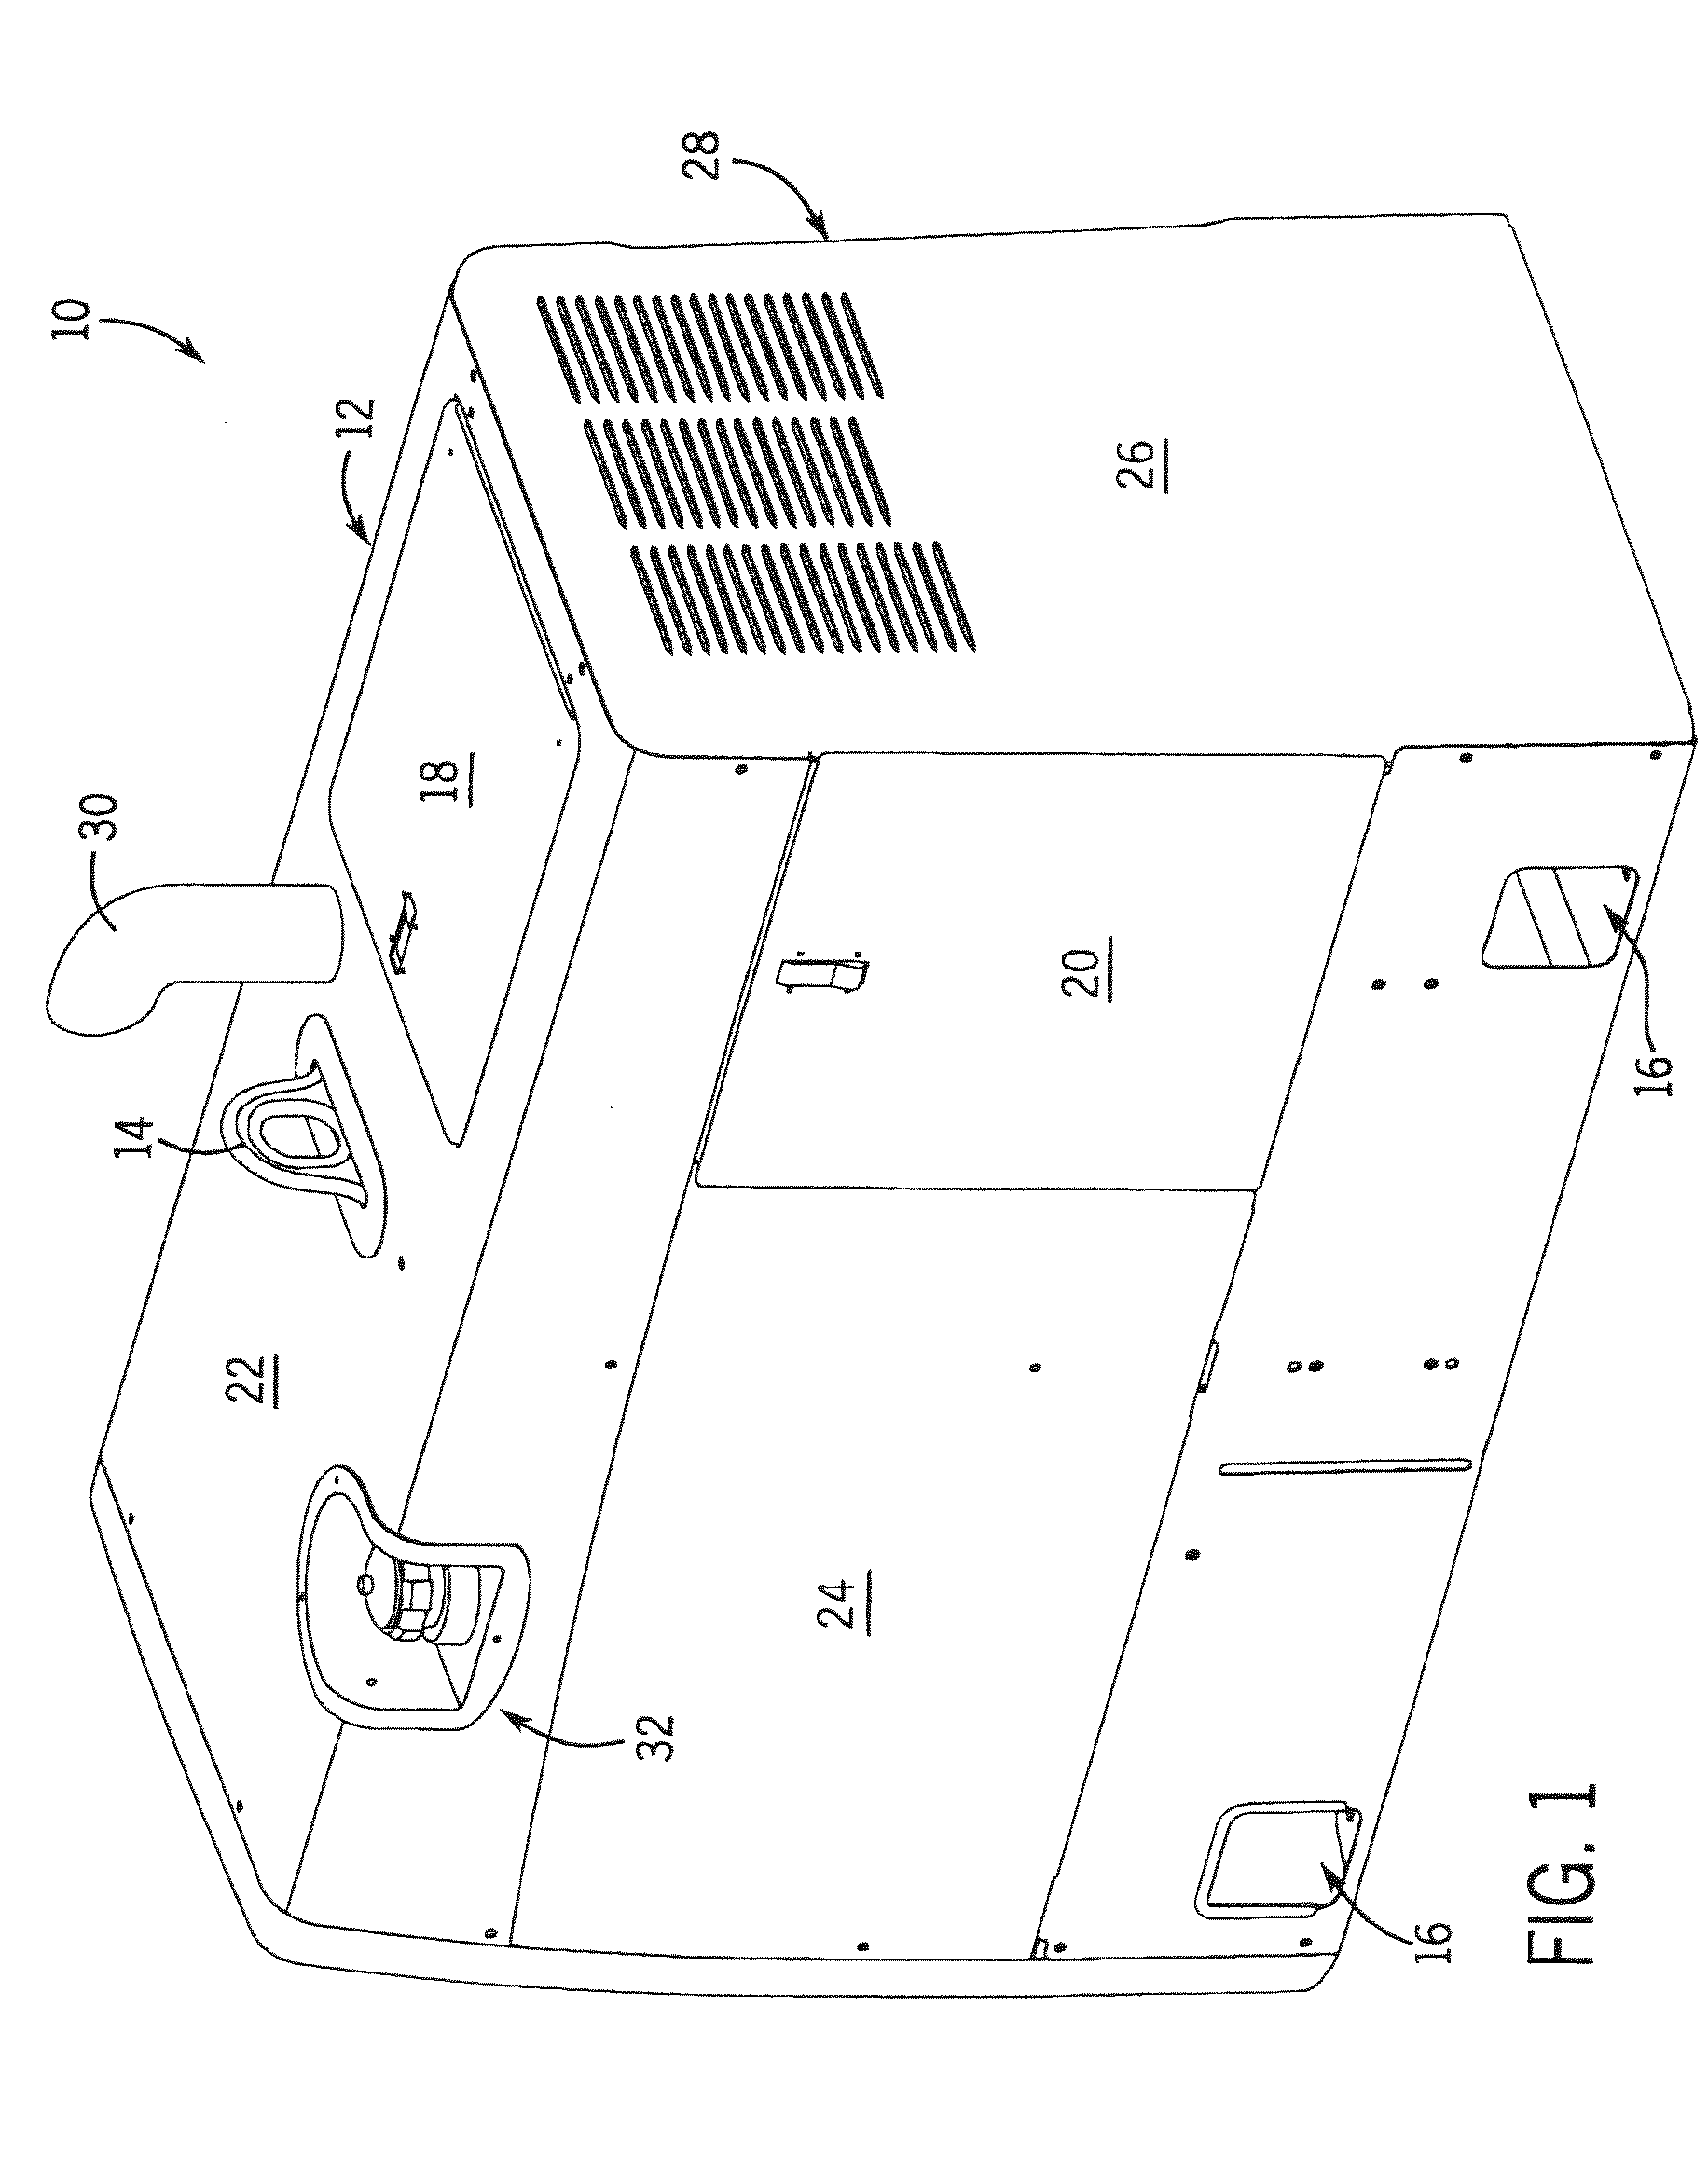 System and method for variable hot start of a welding-type device